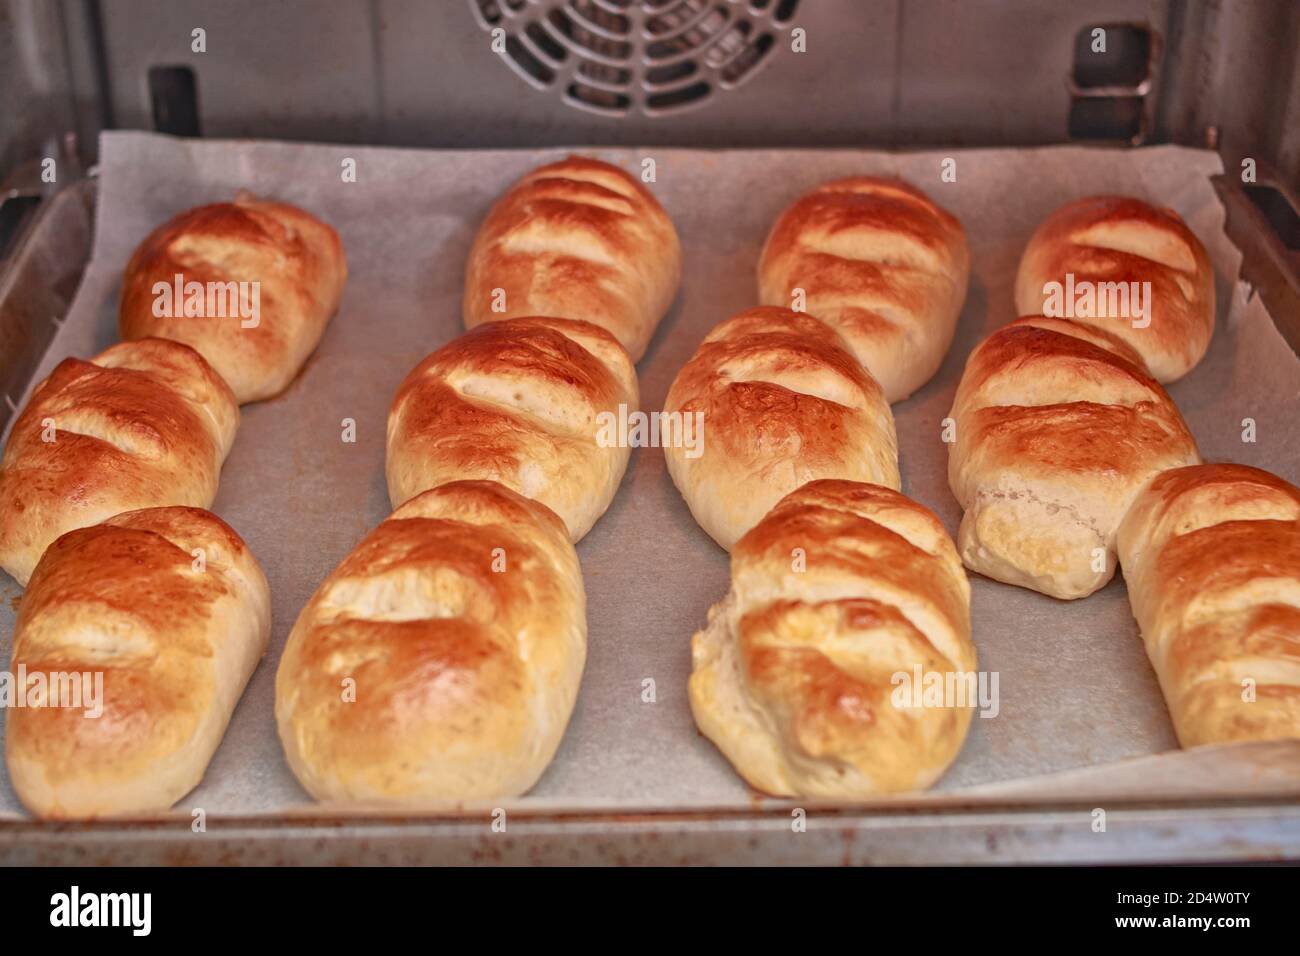 Delicious milk bread buns baking and browning in a home oven Stock Photo